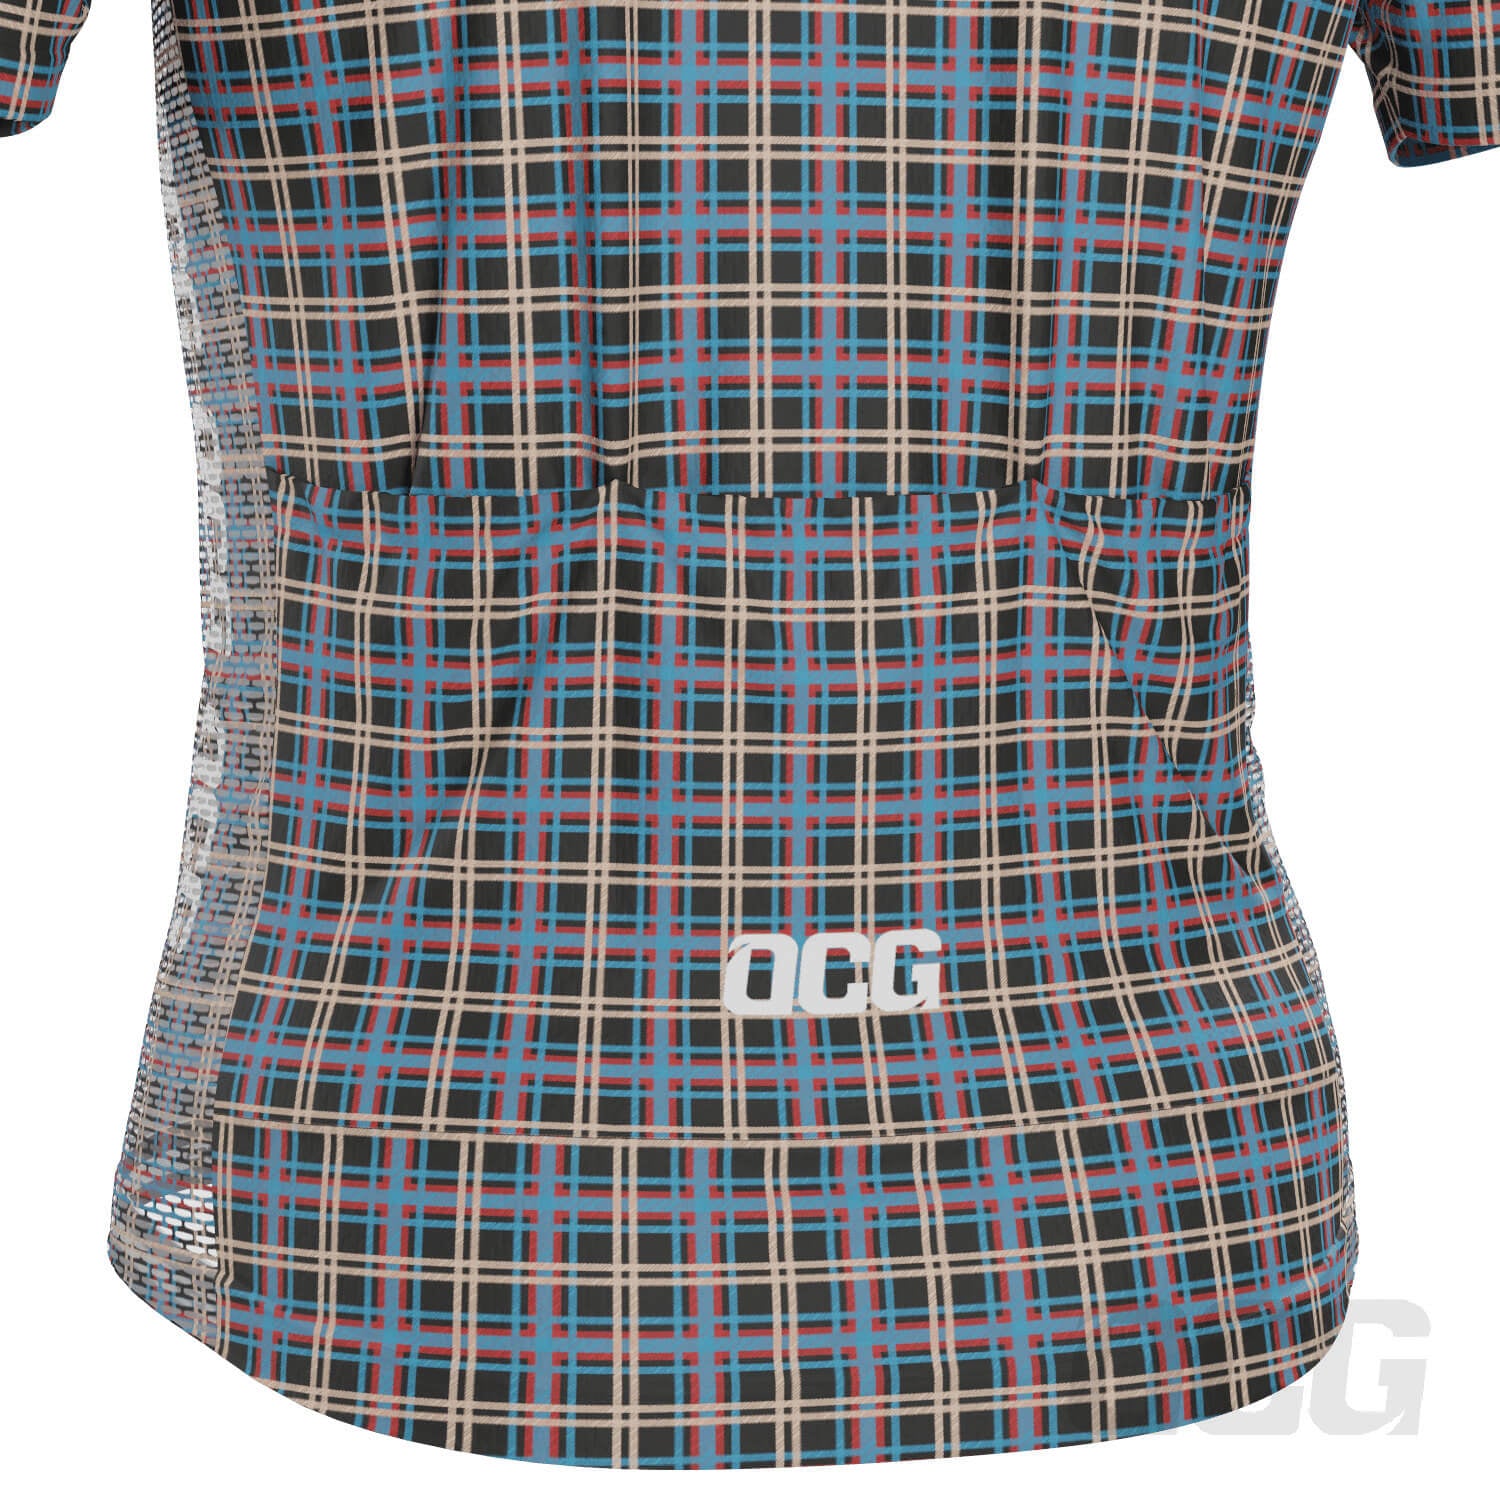 Men's Blue Plaid Checkered Short Sleeve Cycling Jersey